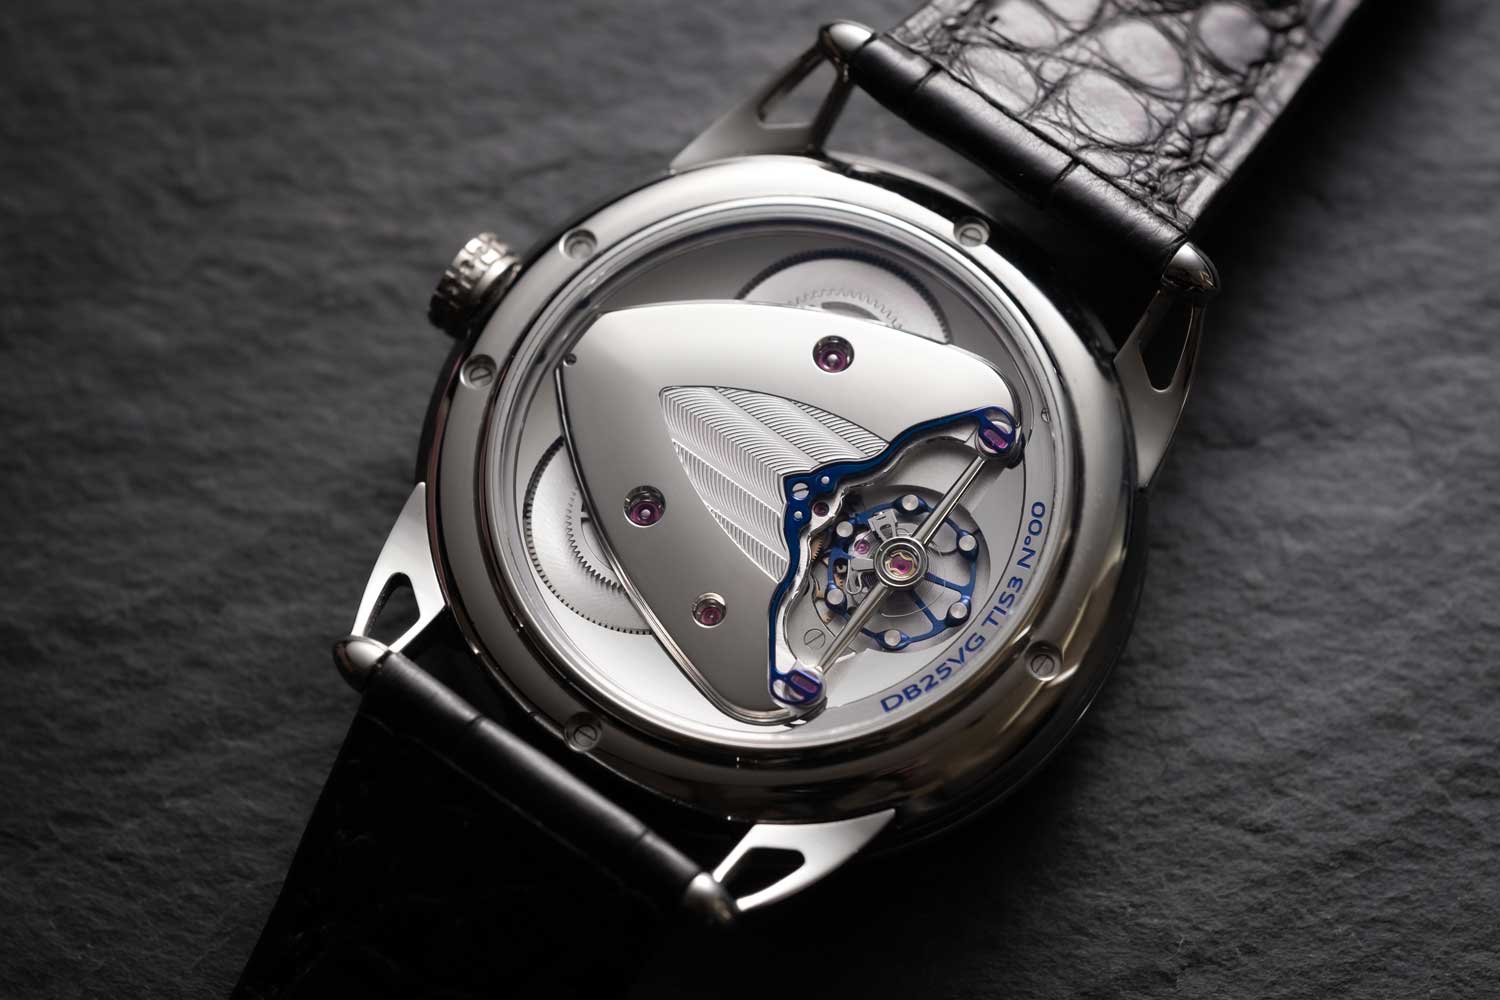 The Calibre DB2507 is De Bethune’s 29th in-house movement